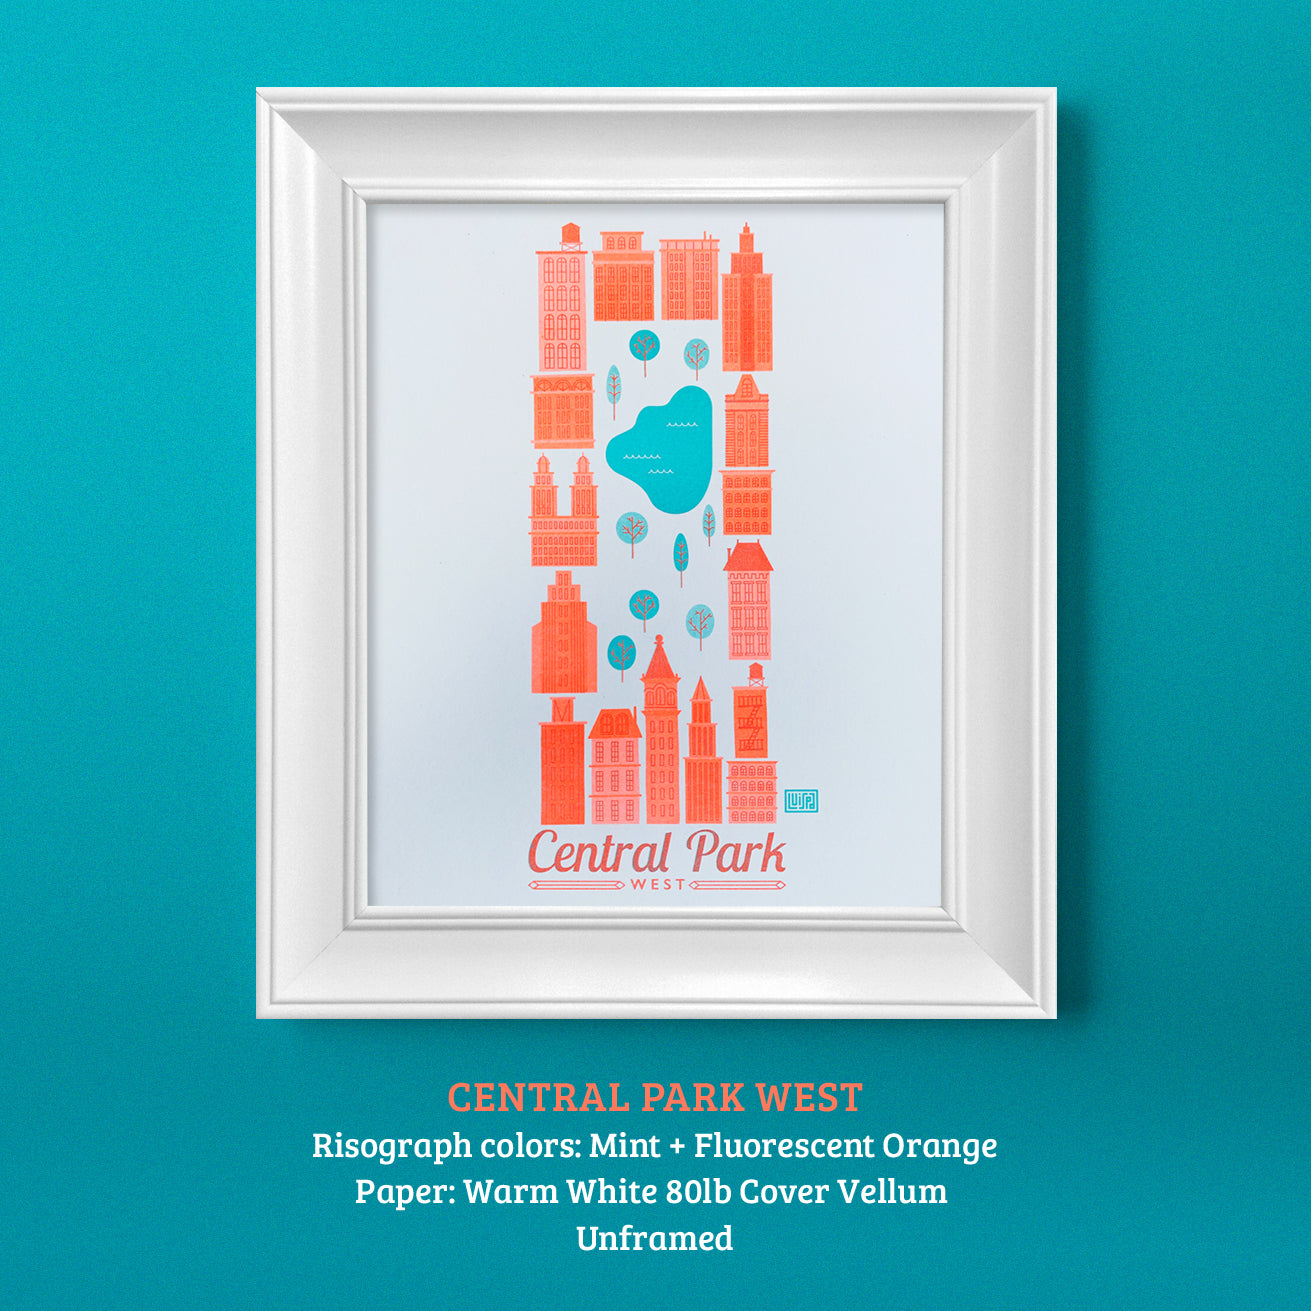 Central Park Risograph Print by Lulab